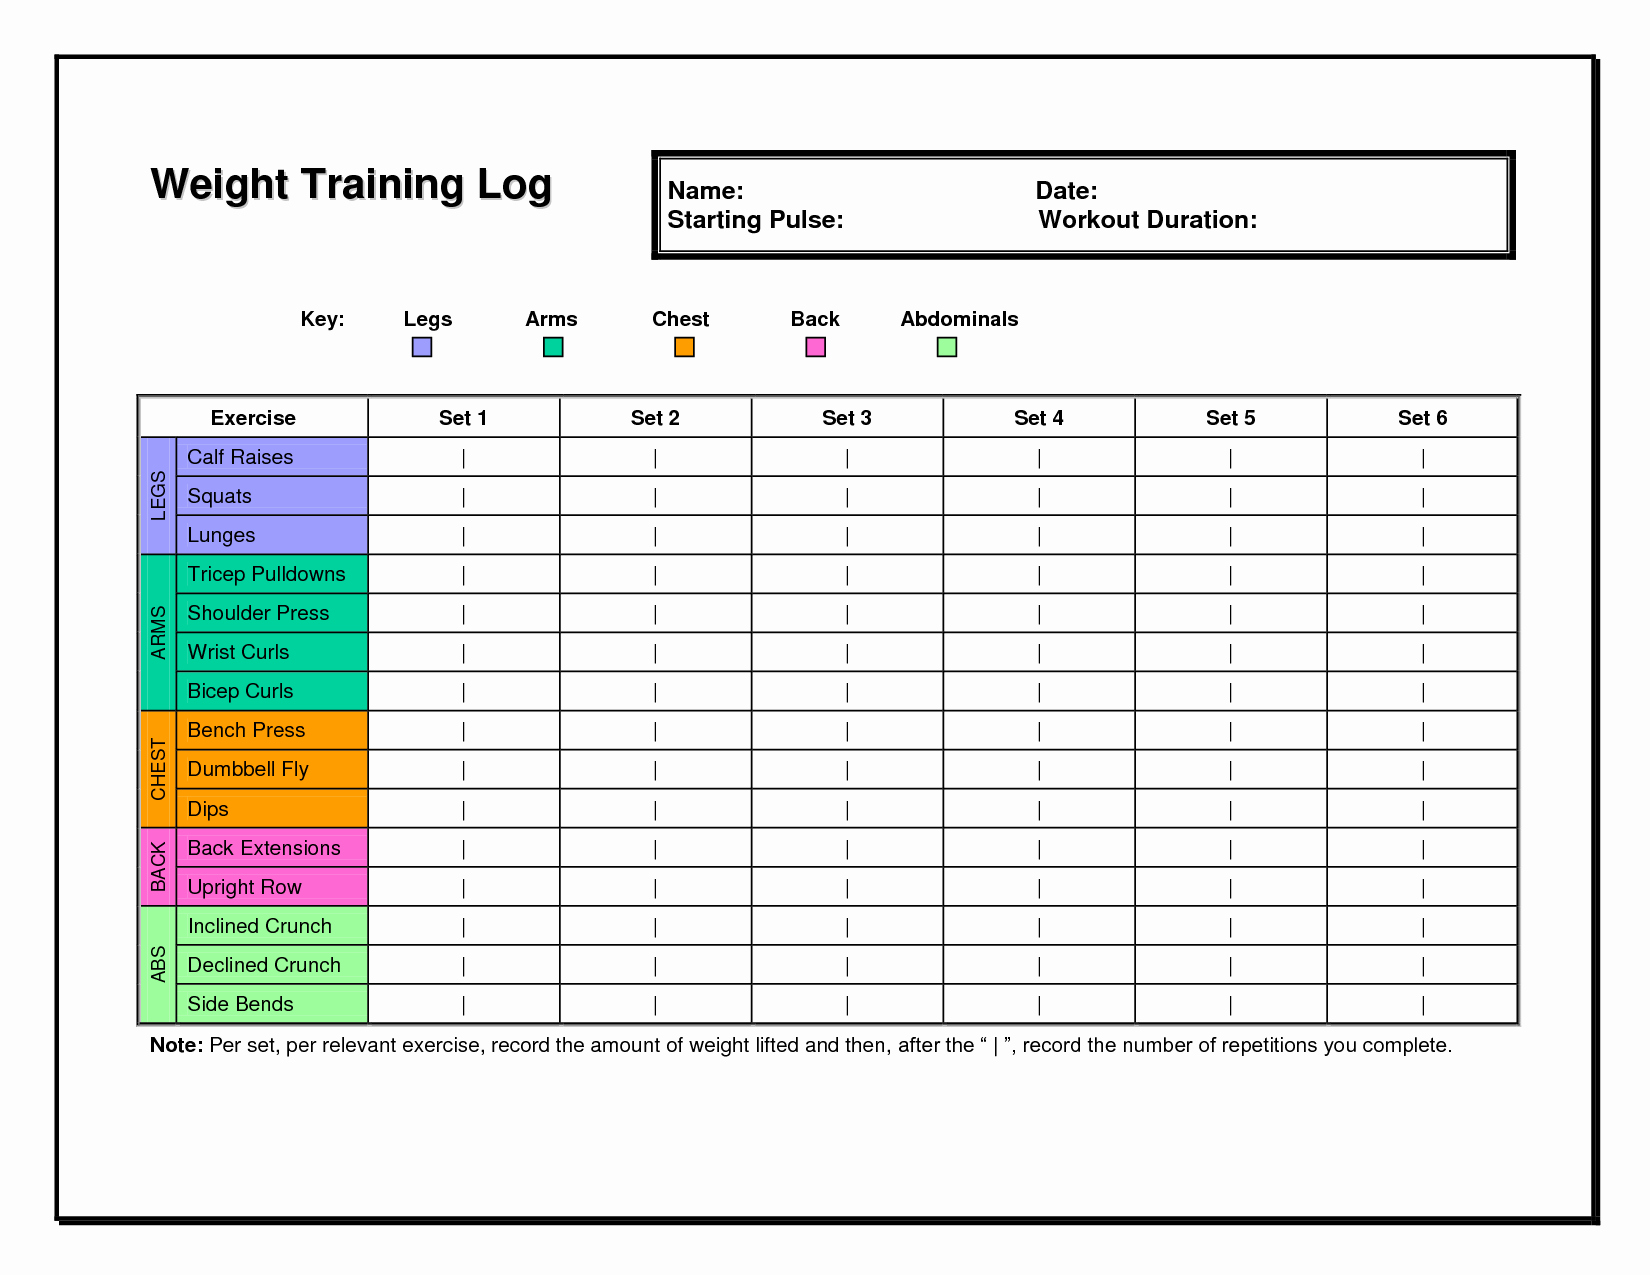 Training Log Template Luxury Workout Log Template Fitness &amp; Health